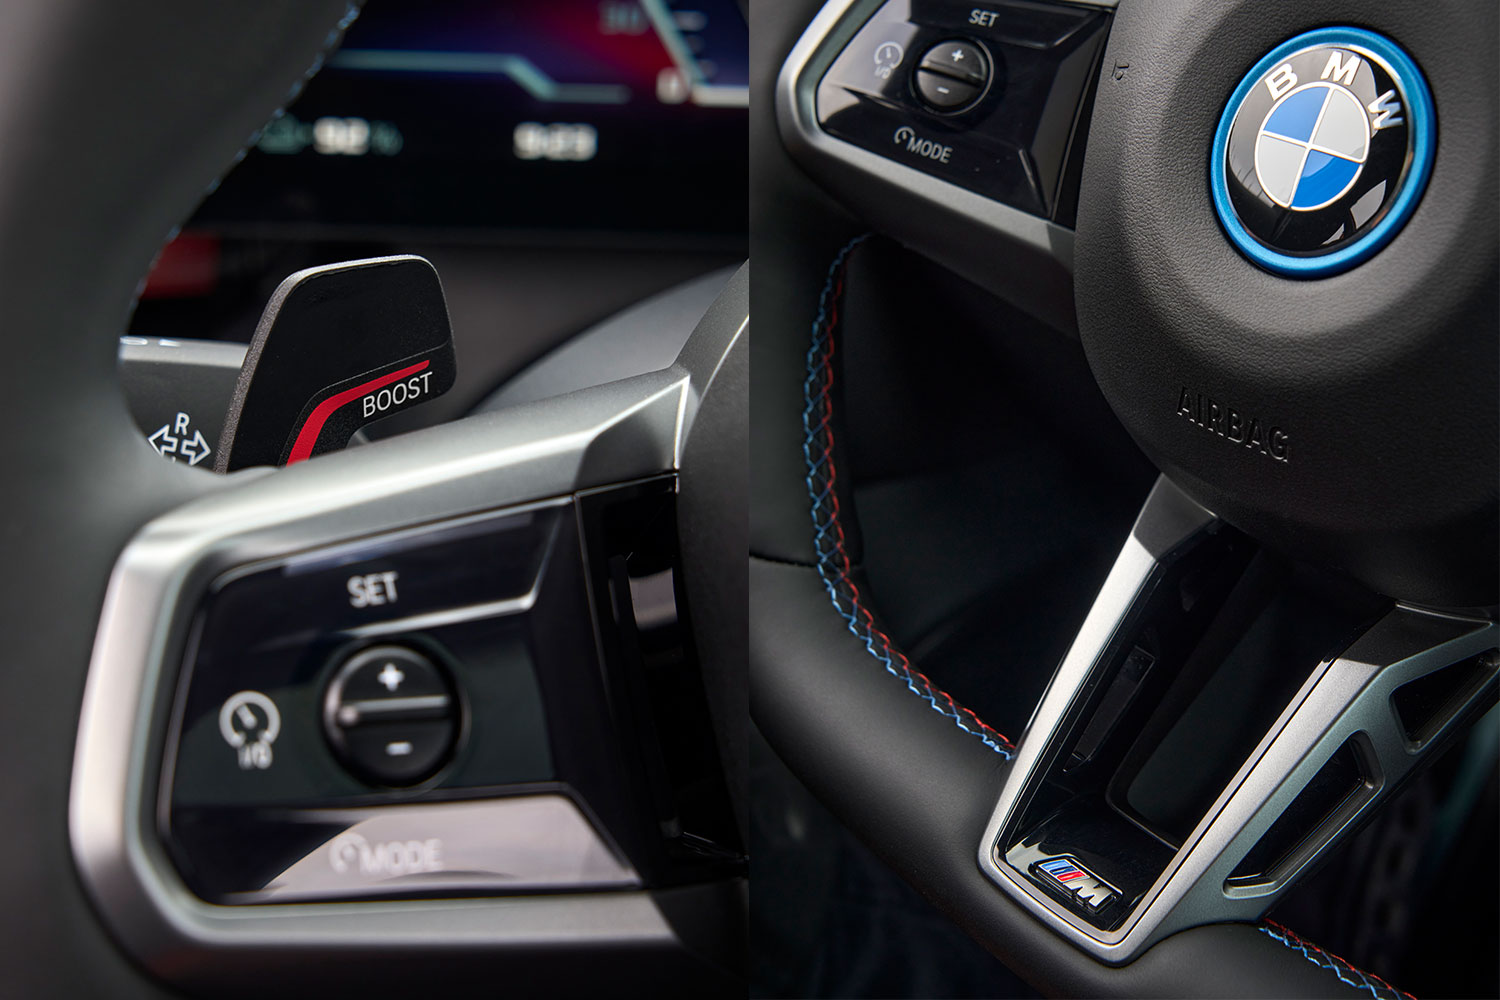 Steering wheel on the BMW i5 M60, with a detail of the Boost paddle pull